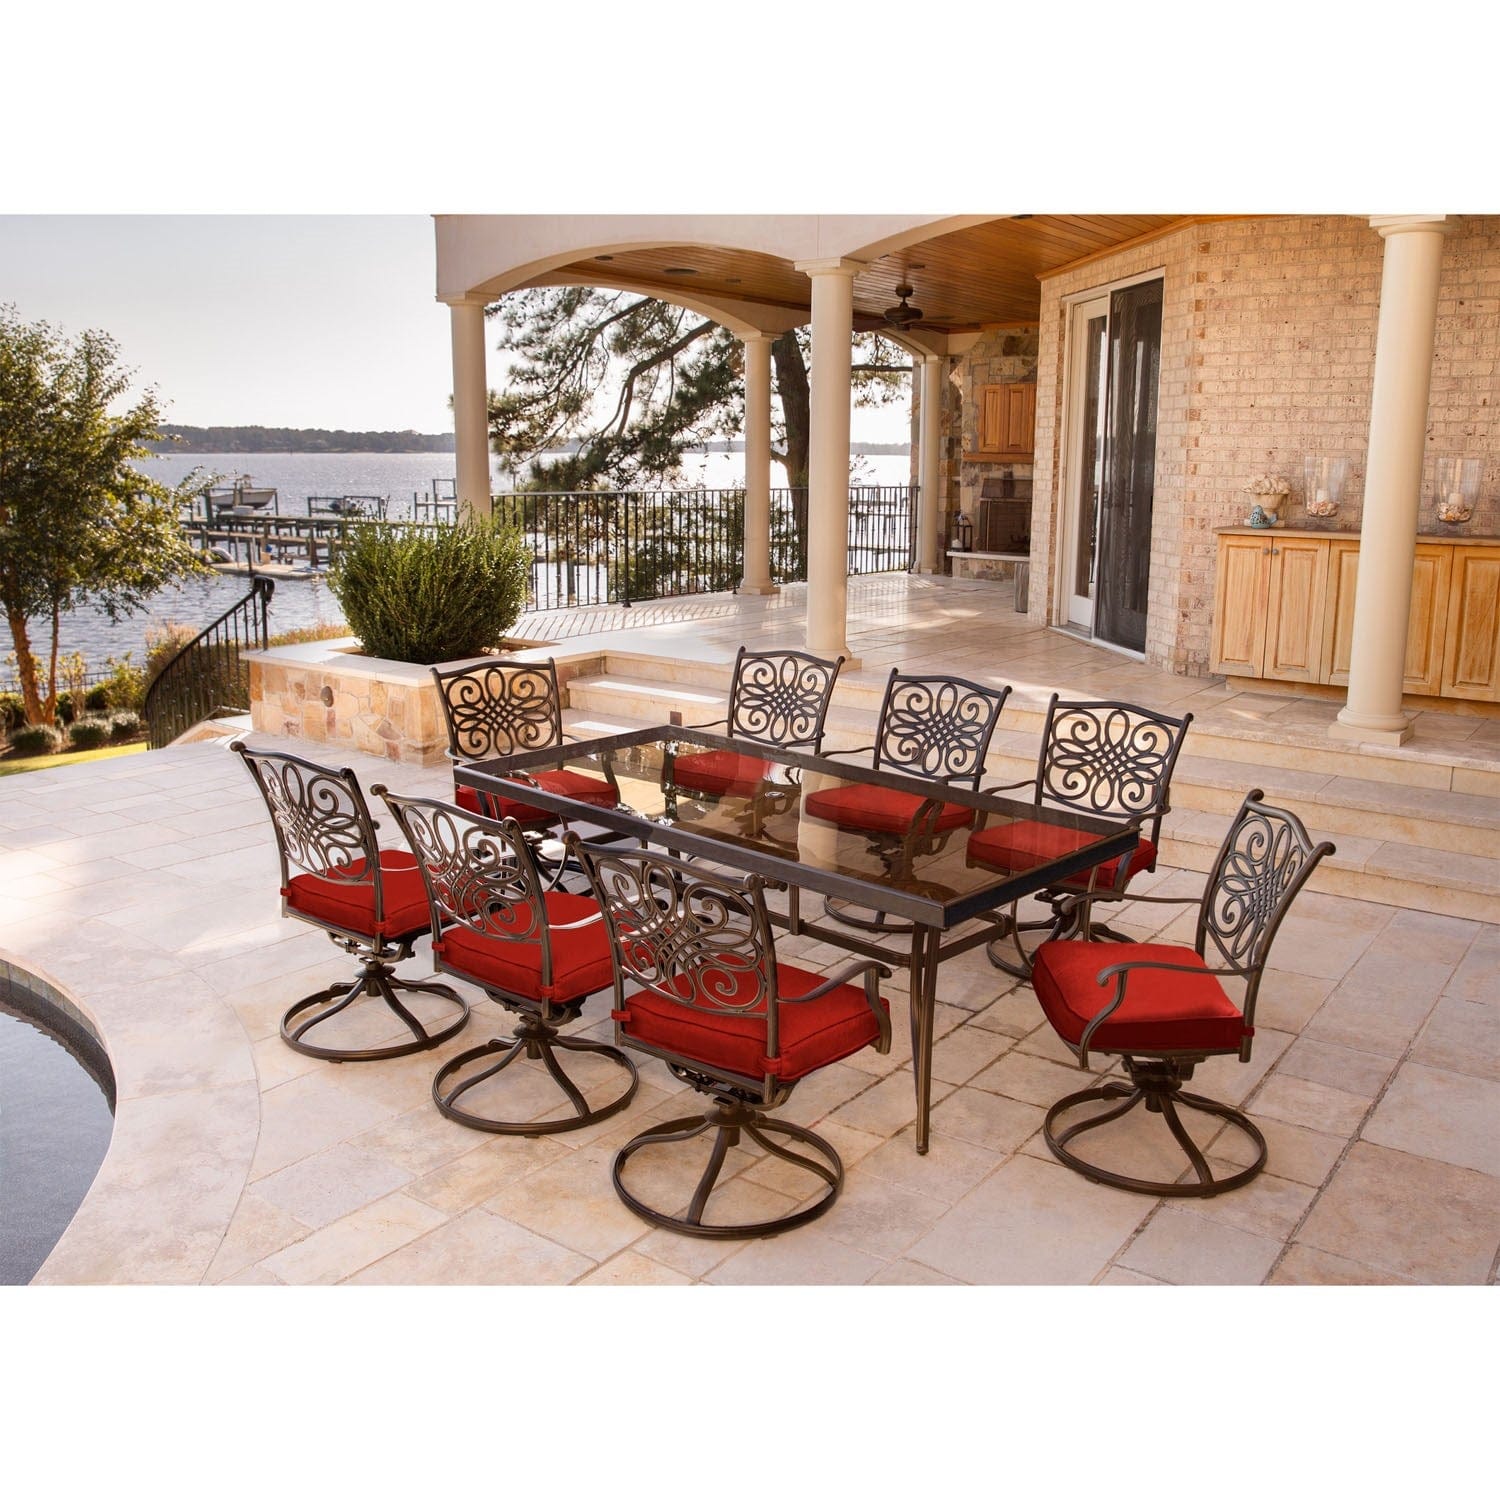 Hanover Outdoor Dining Set Hanover Traditions 9-Piece Aluminium Frame Dining Set in Red with Extra Large Glass-Top Dining Table | TRADDN9PCSWG-RED